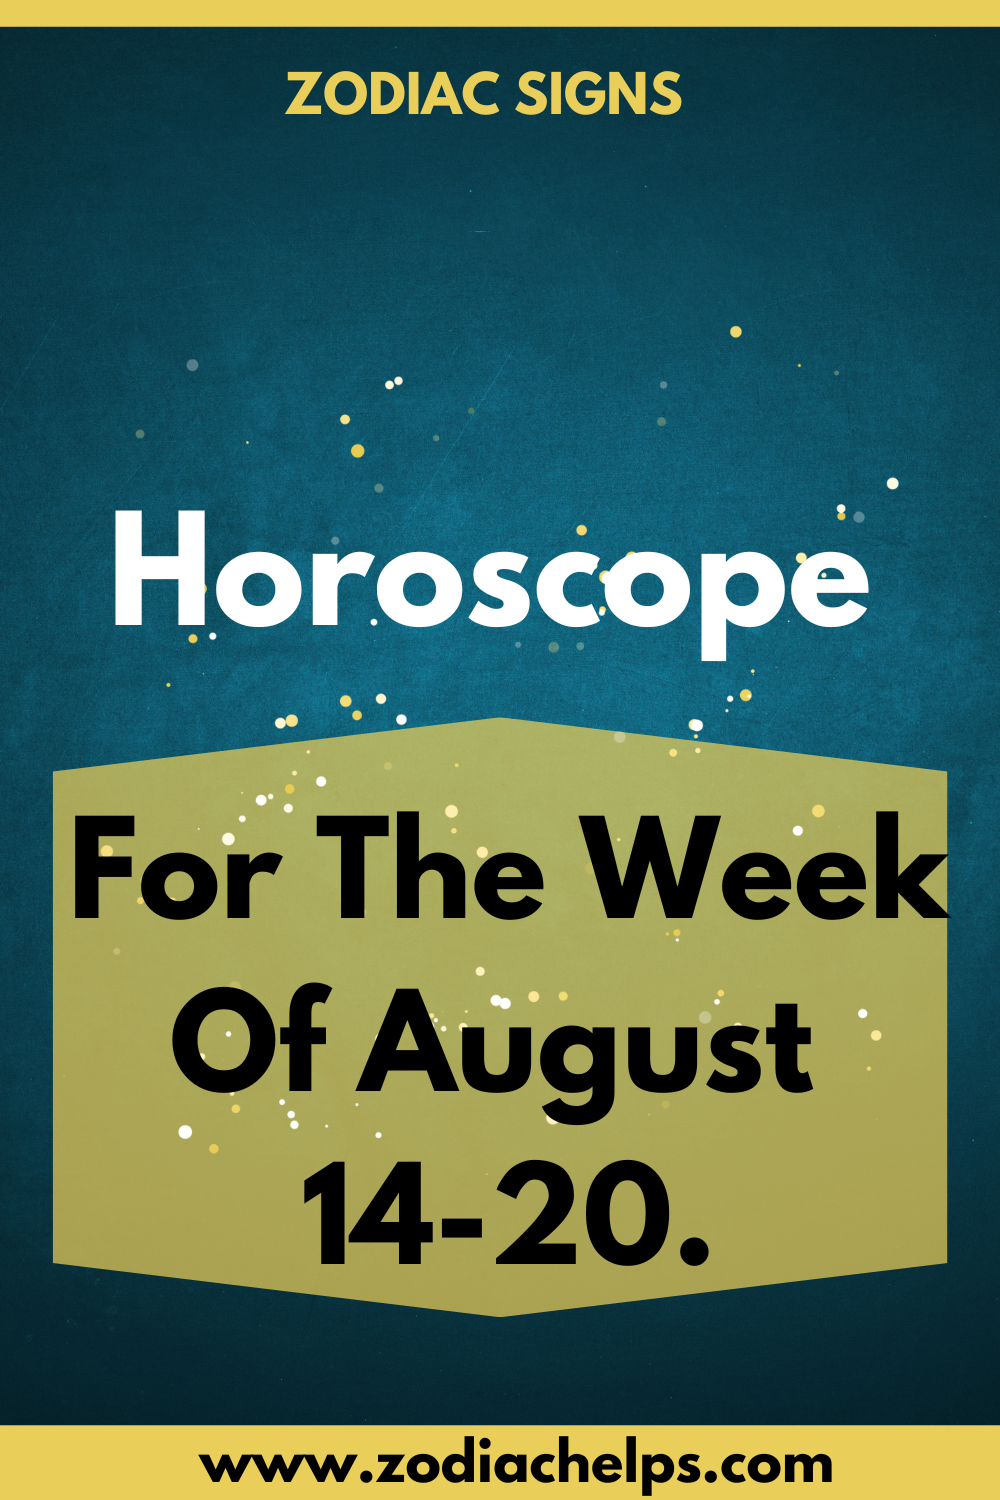 Horoscope For The Week Of August 14-20.